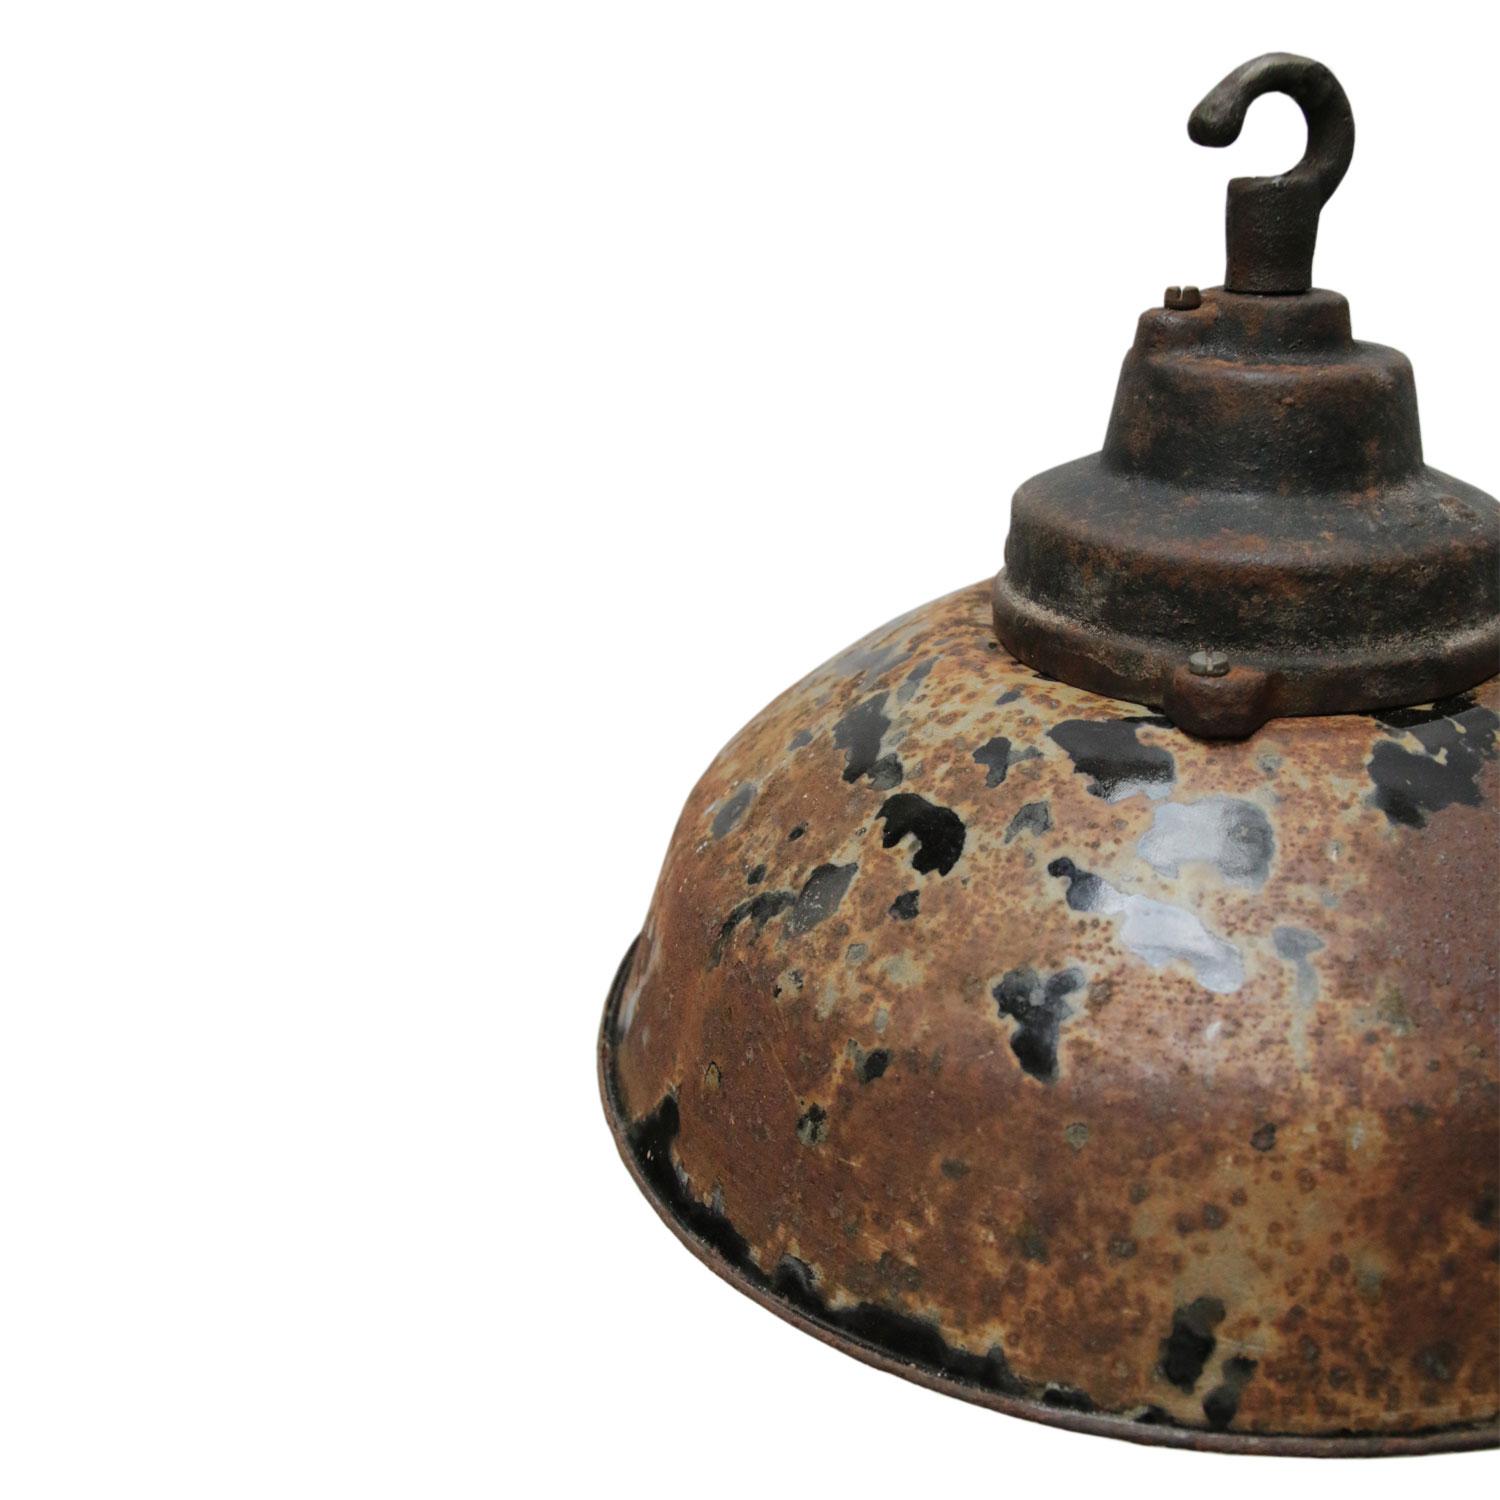 Rare French industrial pendant made of enamel with cast iron top.

Weight 2.5 kg / 5.5 lb.

All lamps have been made suitable by international standards for incandescent light bulbs, energy-efficient and LED bulbs with an E27 socket, max 150W.